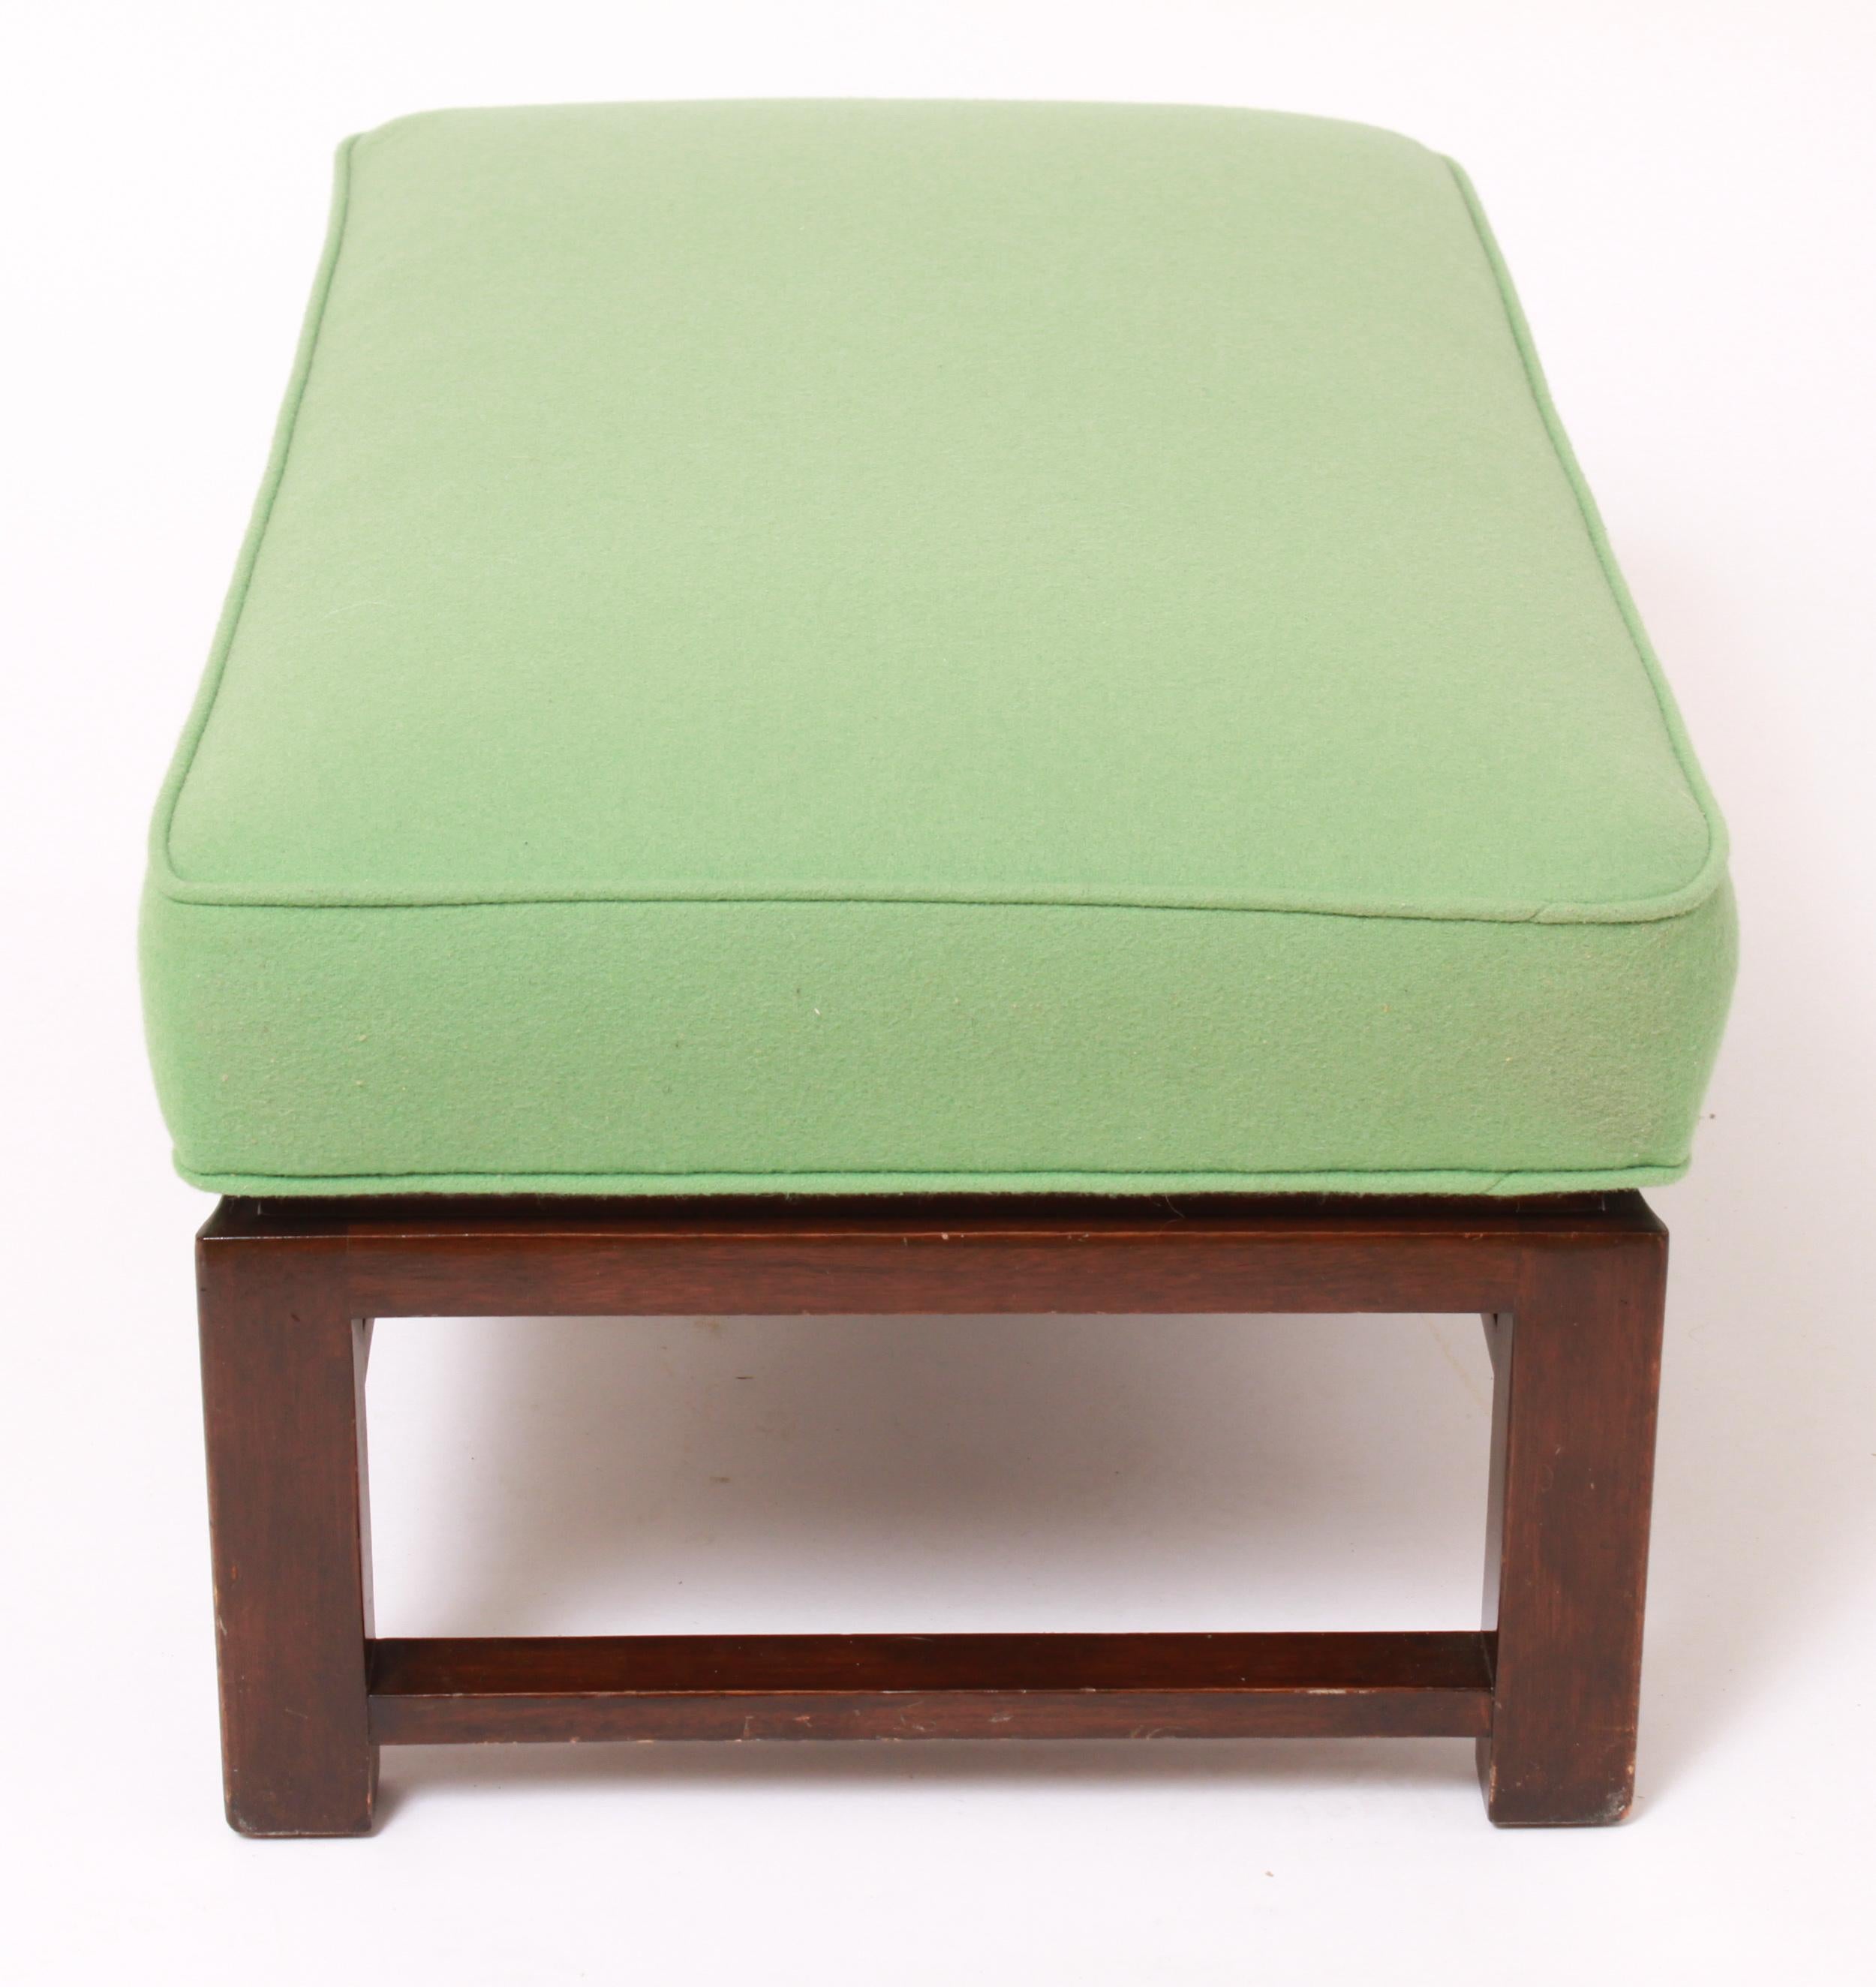 American Mid-Century Modern Upholstered Bench Attributed to Edward Wormley for Dunbar